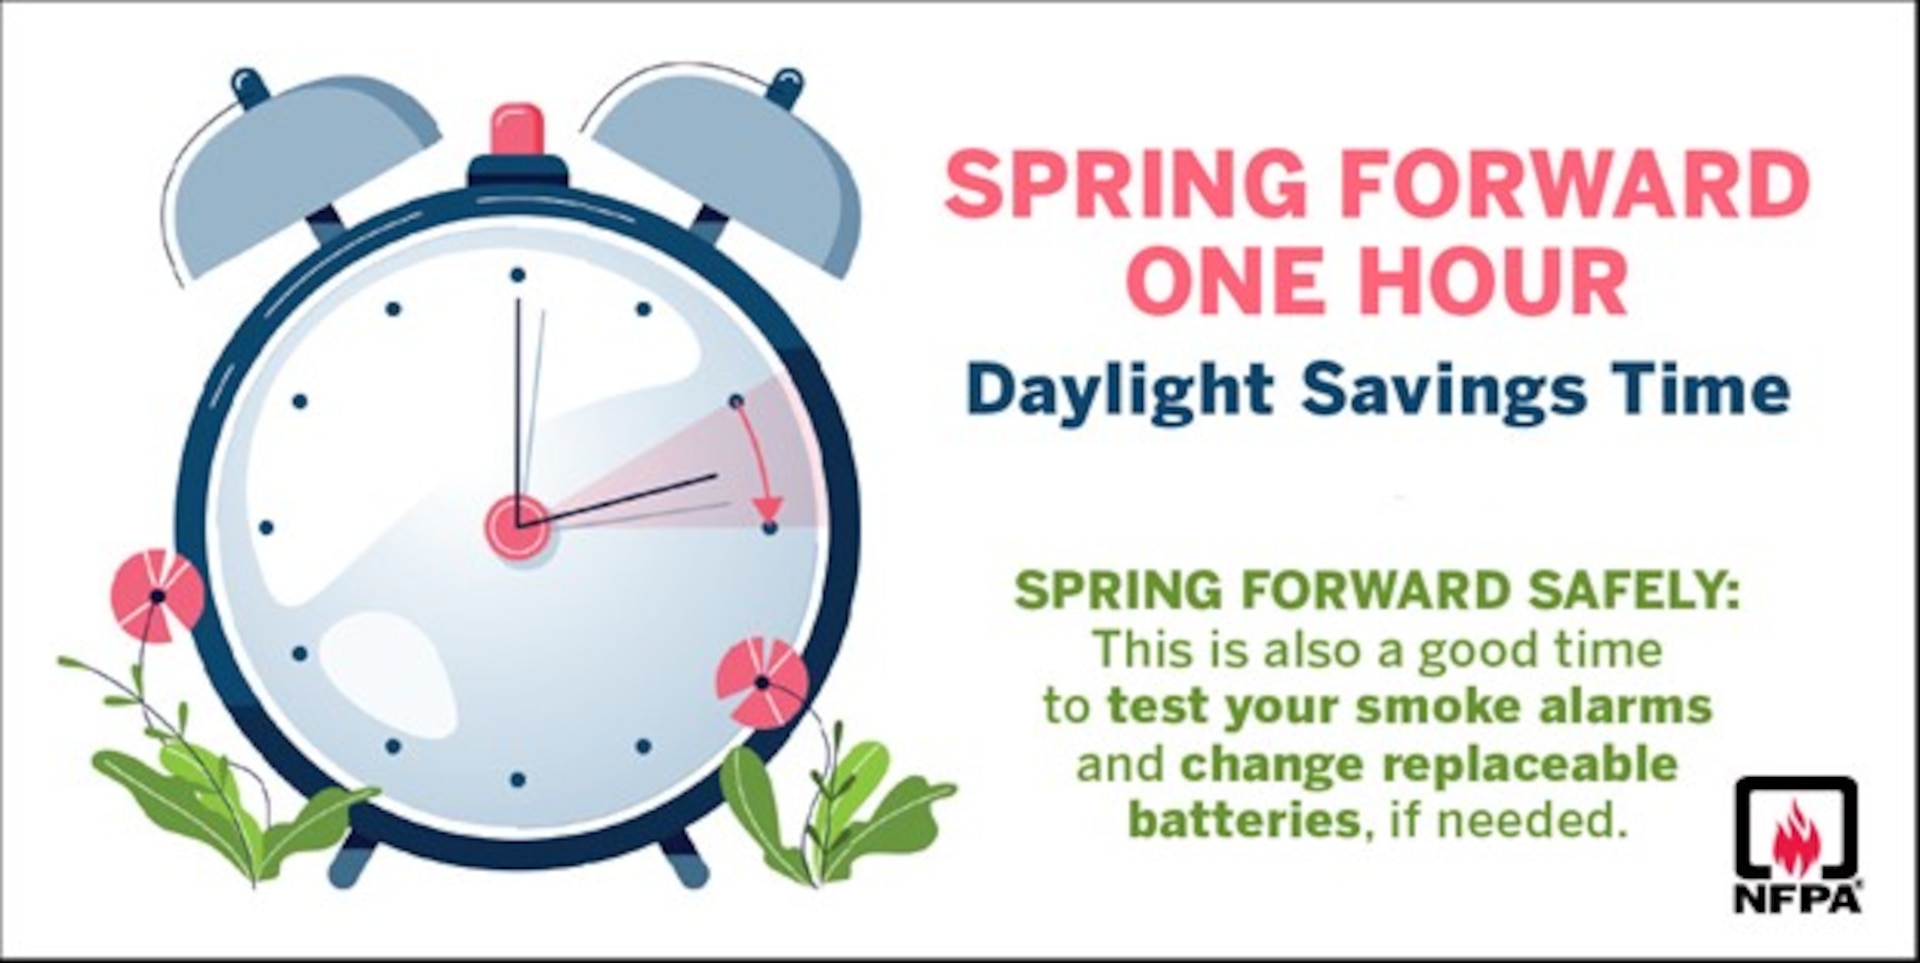 Spring forward March 12: Change your clocks, batteries